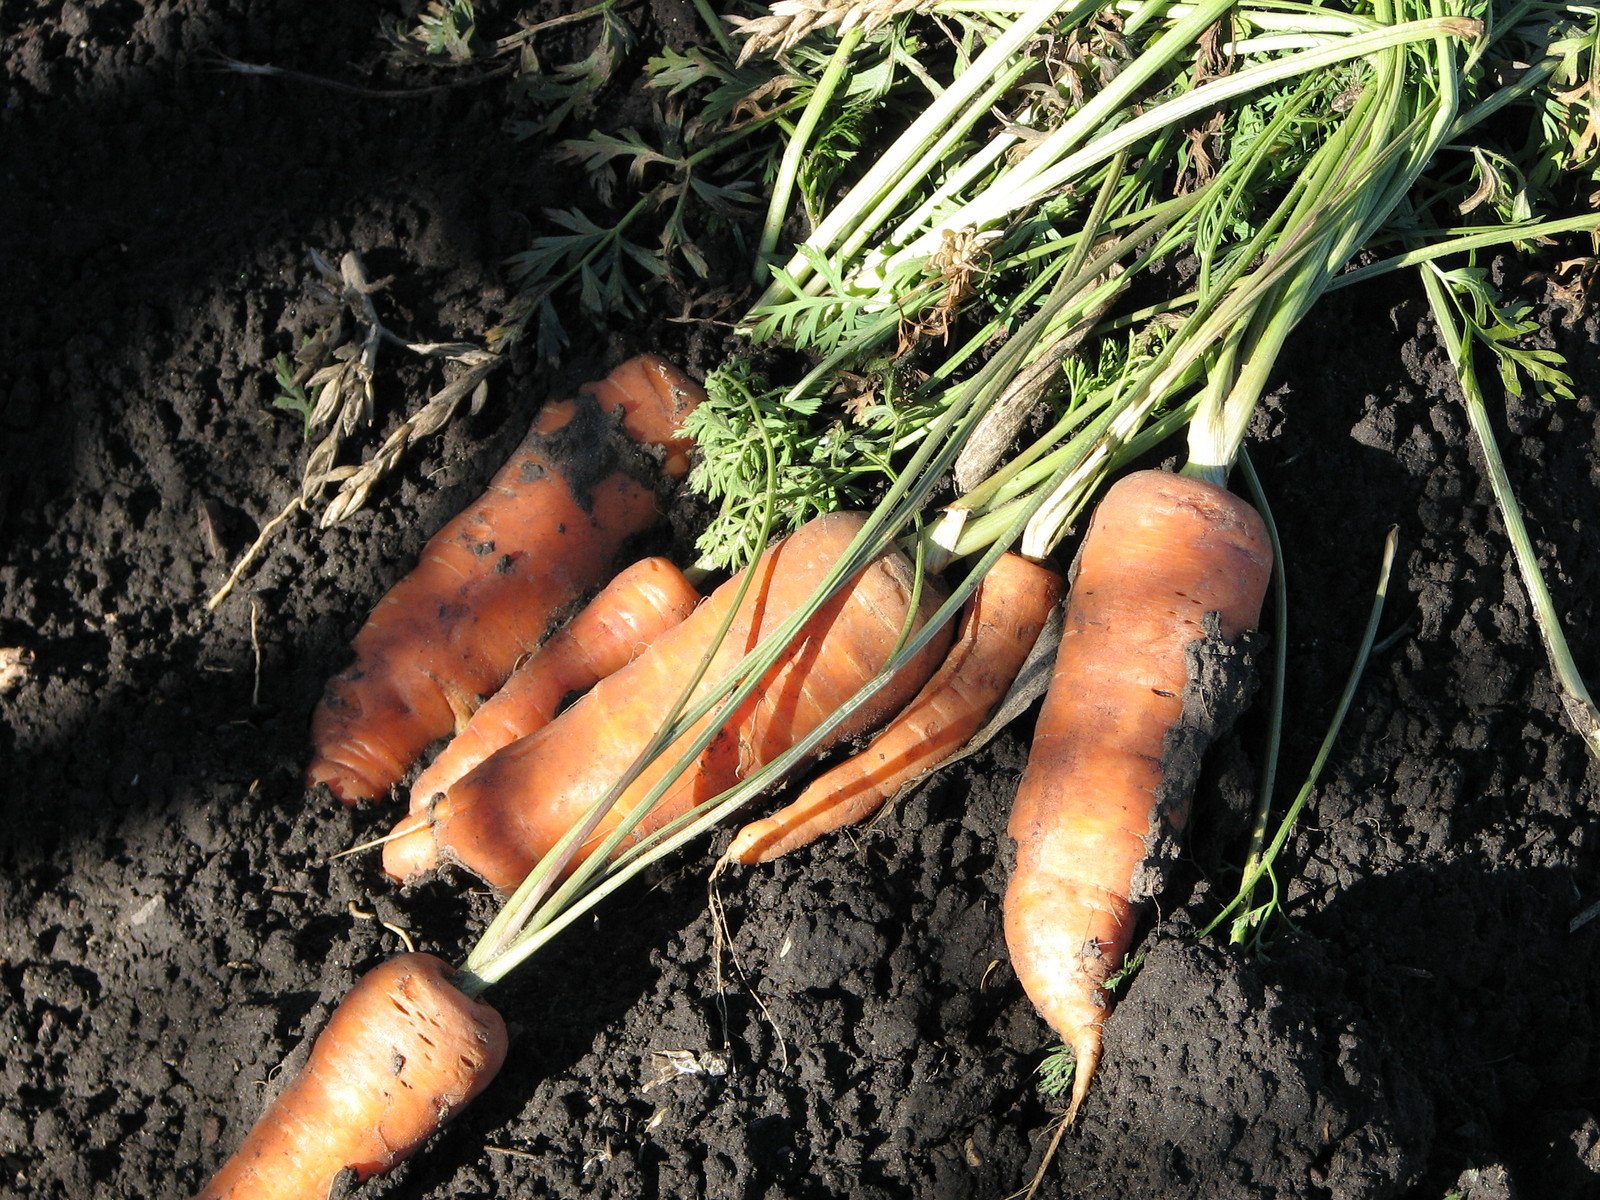 four carrots with their tops still on, sitting in dirt